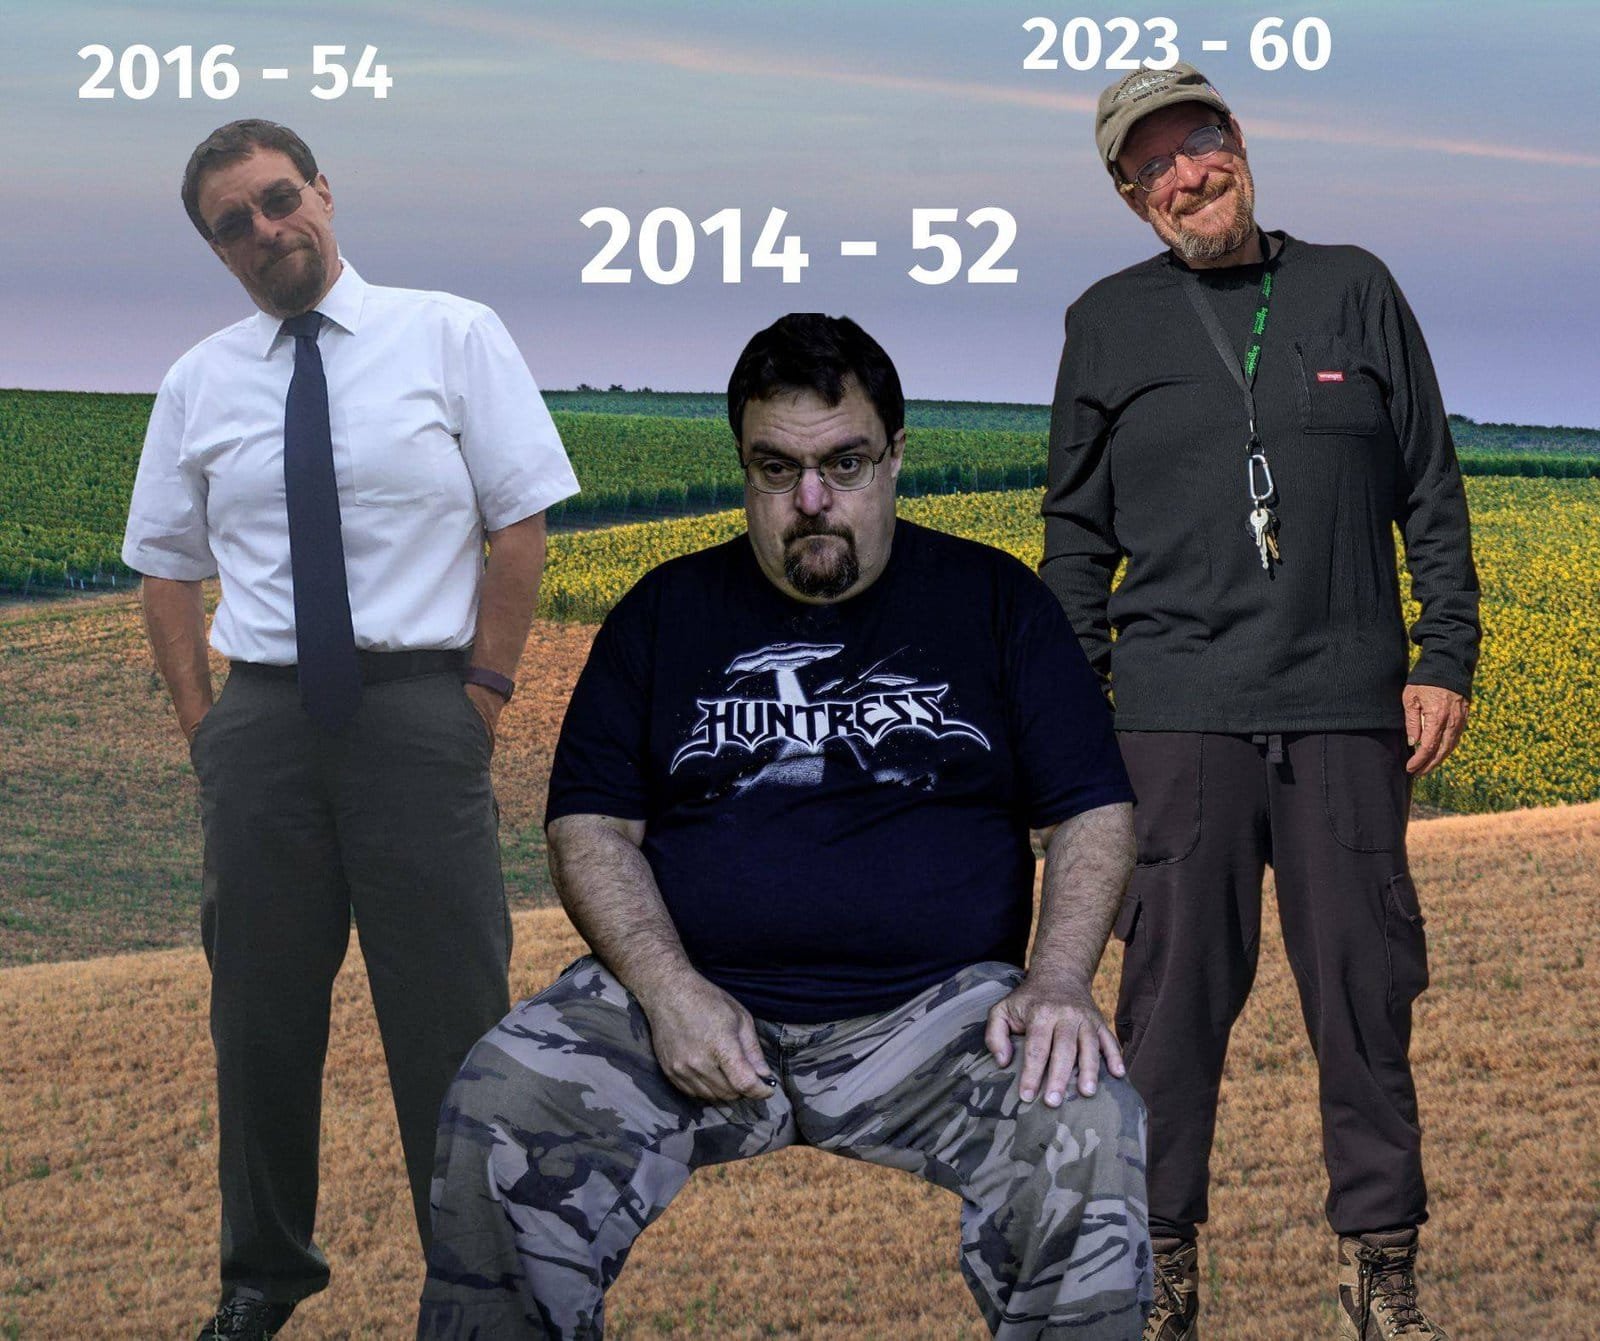 2014 To 2023 Fat Loss Journey 1